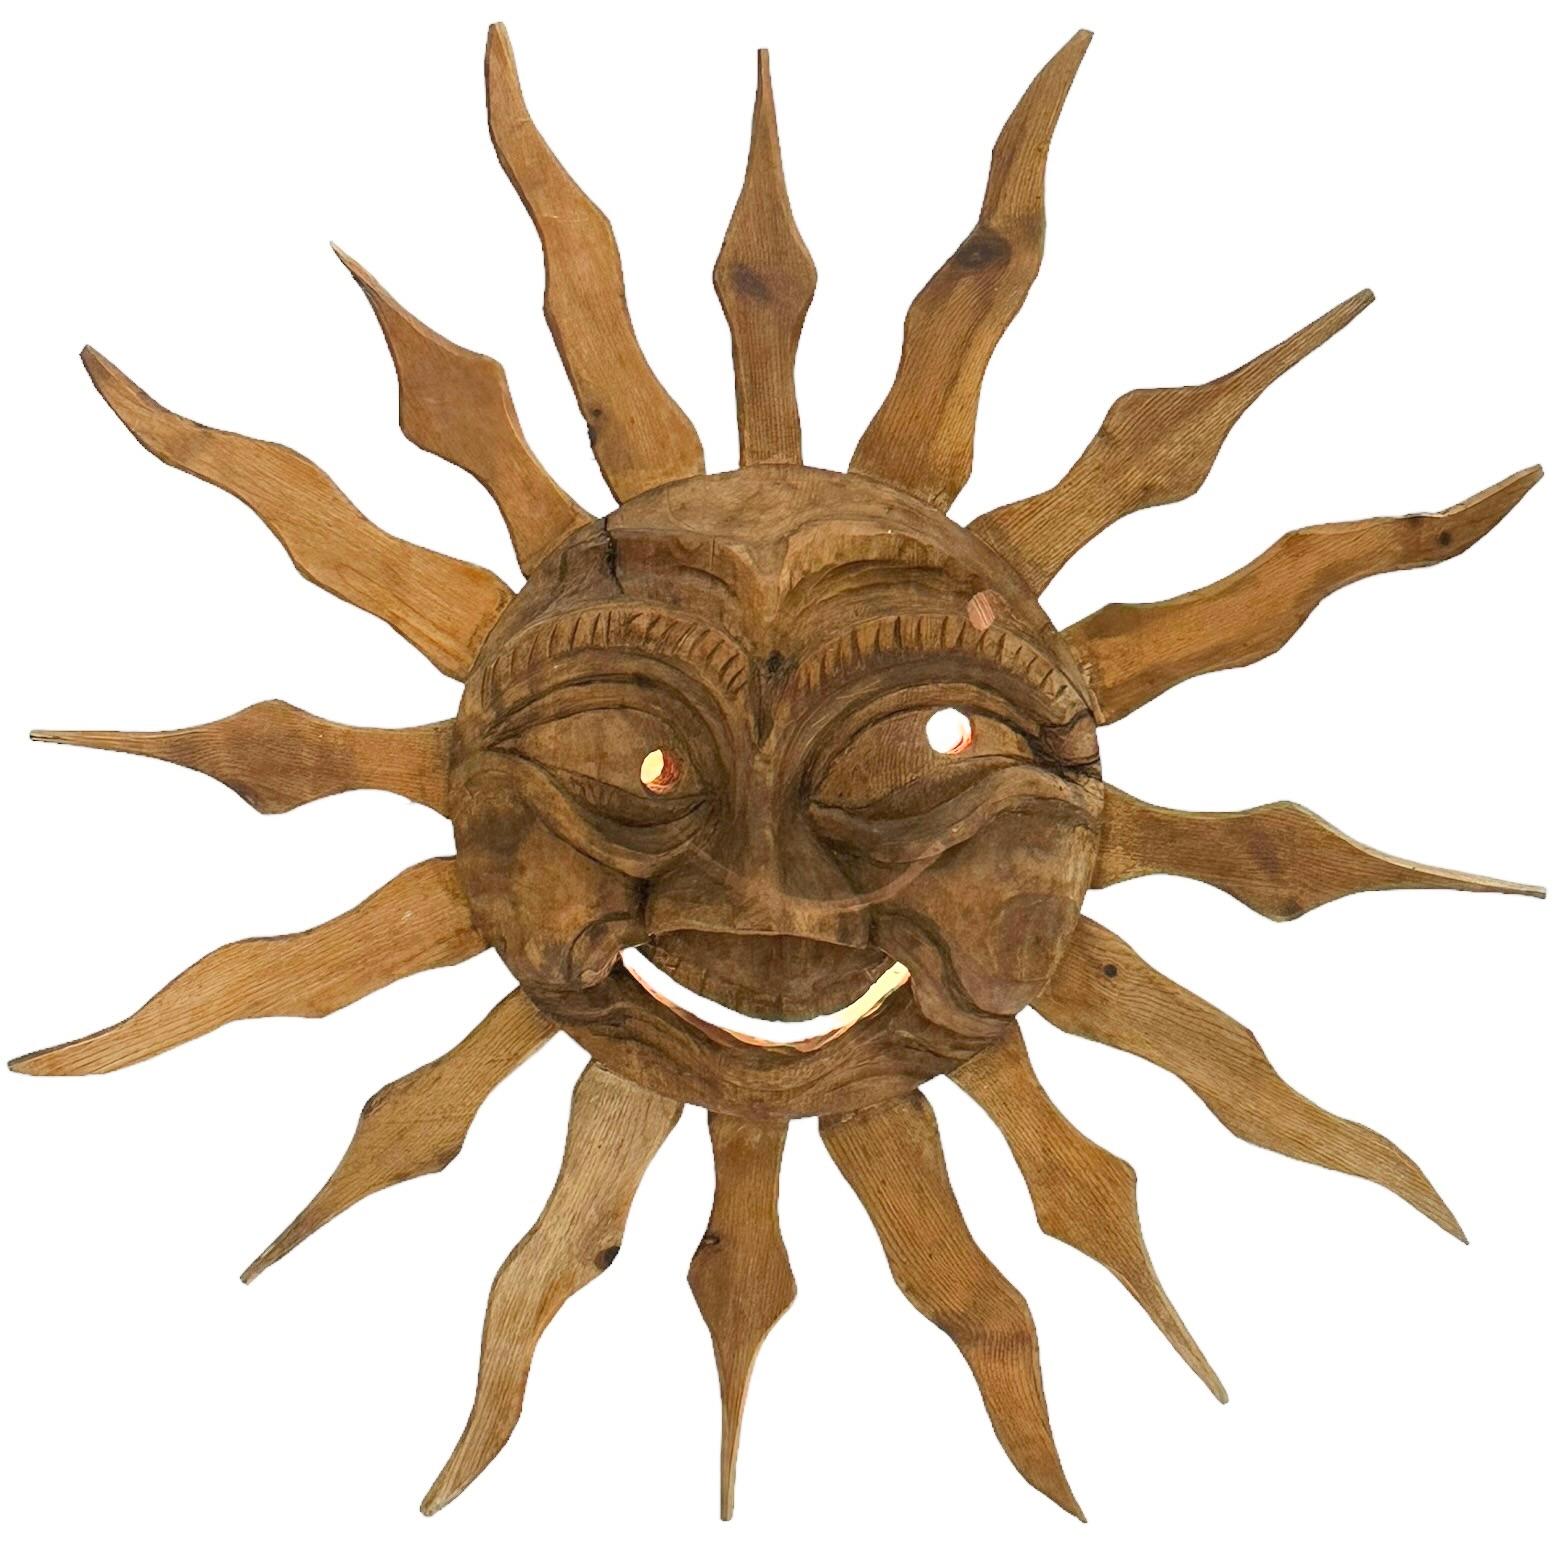 Beautiful wooden handcrafted Sun Face Wall Light Sculpture. Made in Germany by a wood worker in the 1900's to 1920's. Changed to a wall light in the 1950's. Gorgeous detailed carving of a Sun with a Face, with one single light. The fixture requires